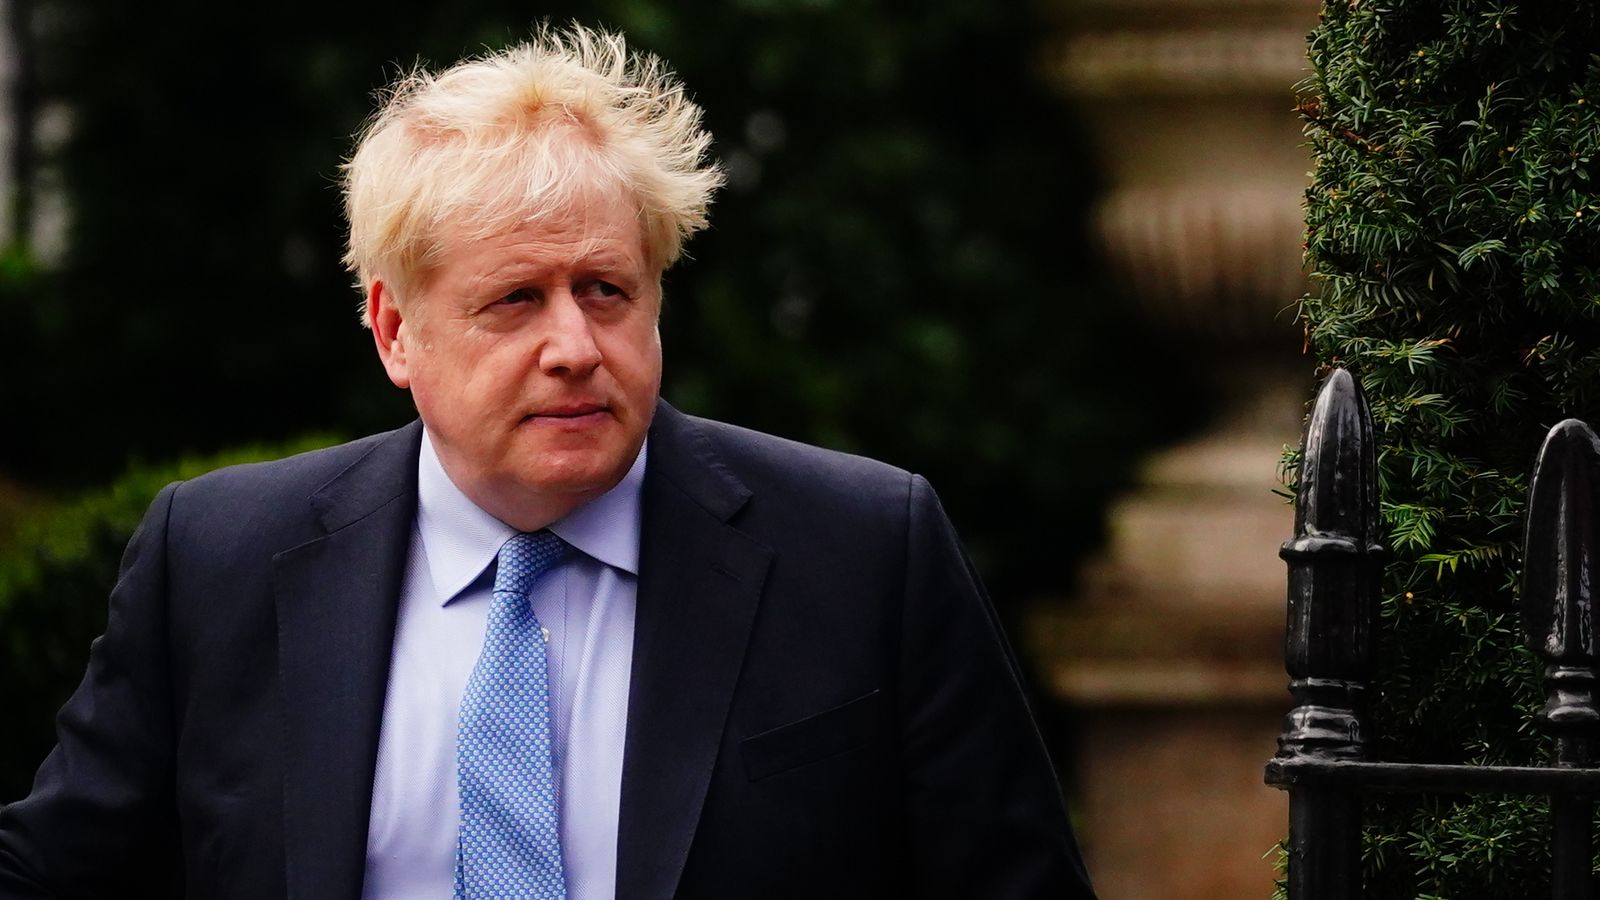 Boris Johnson committed 'clear and unambiguous' rule breach by taking columnist job, says watchdog